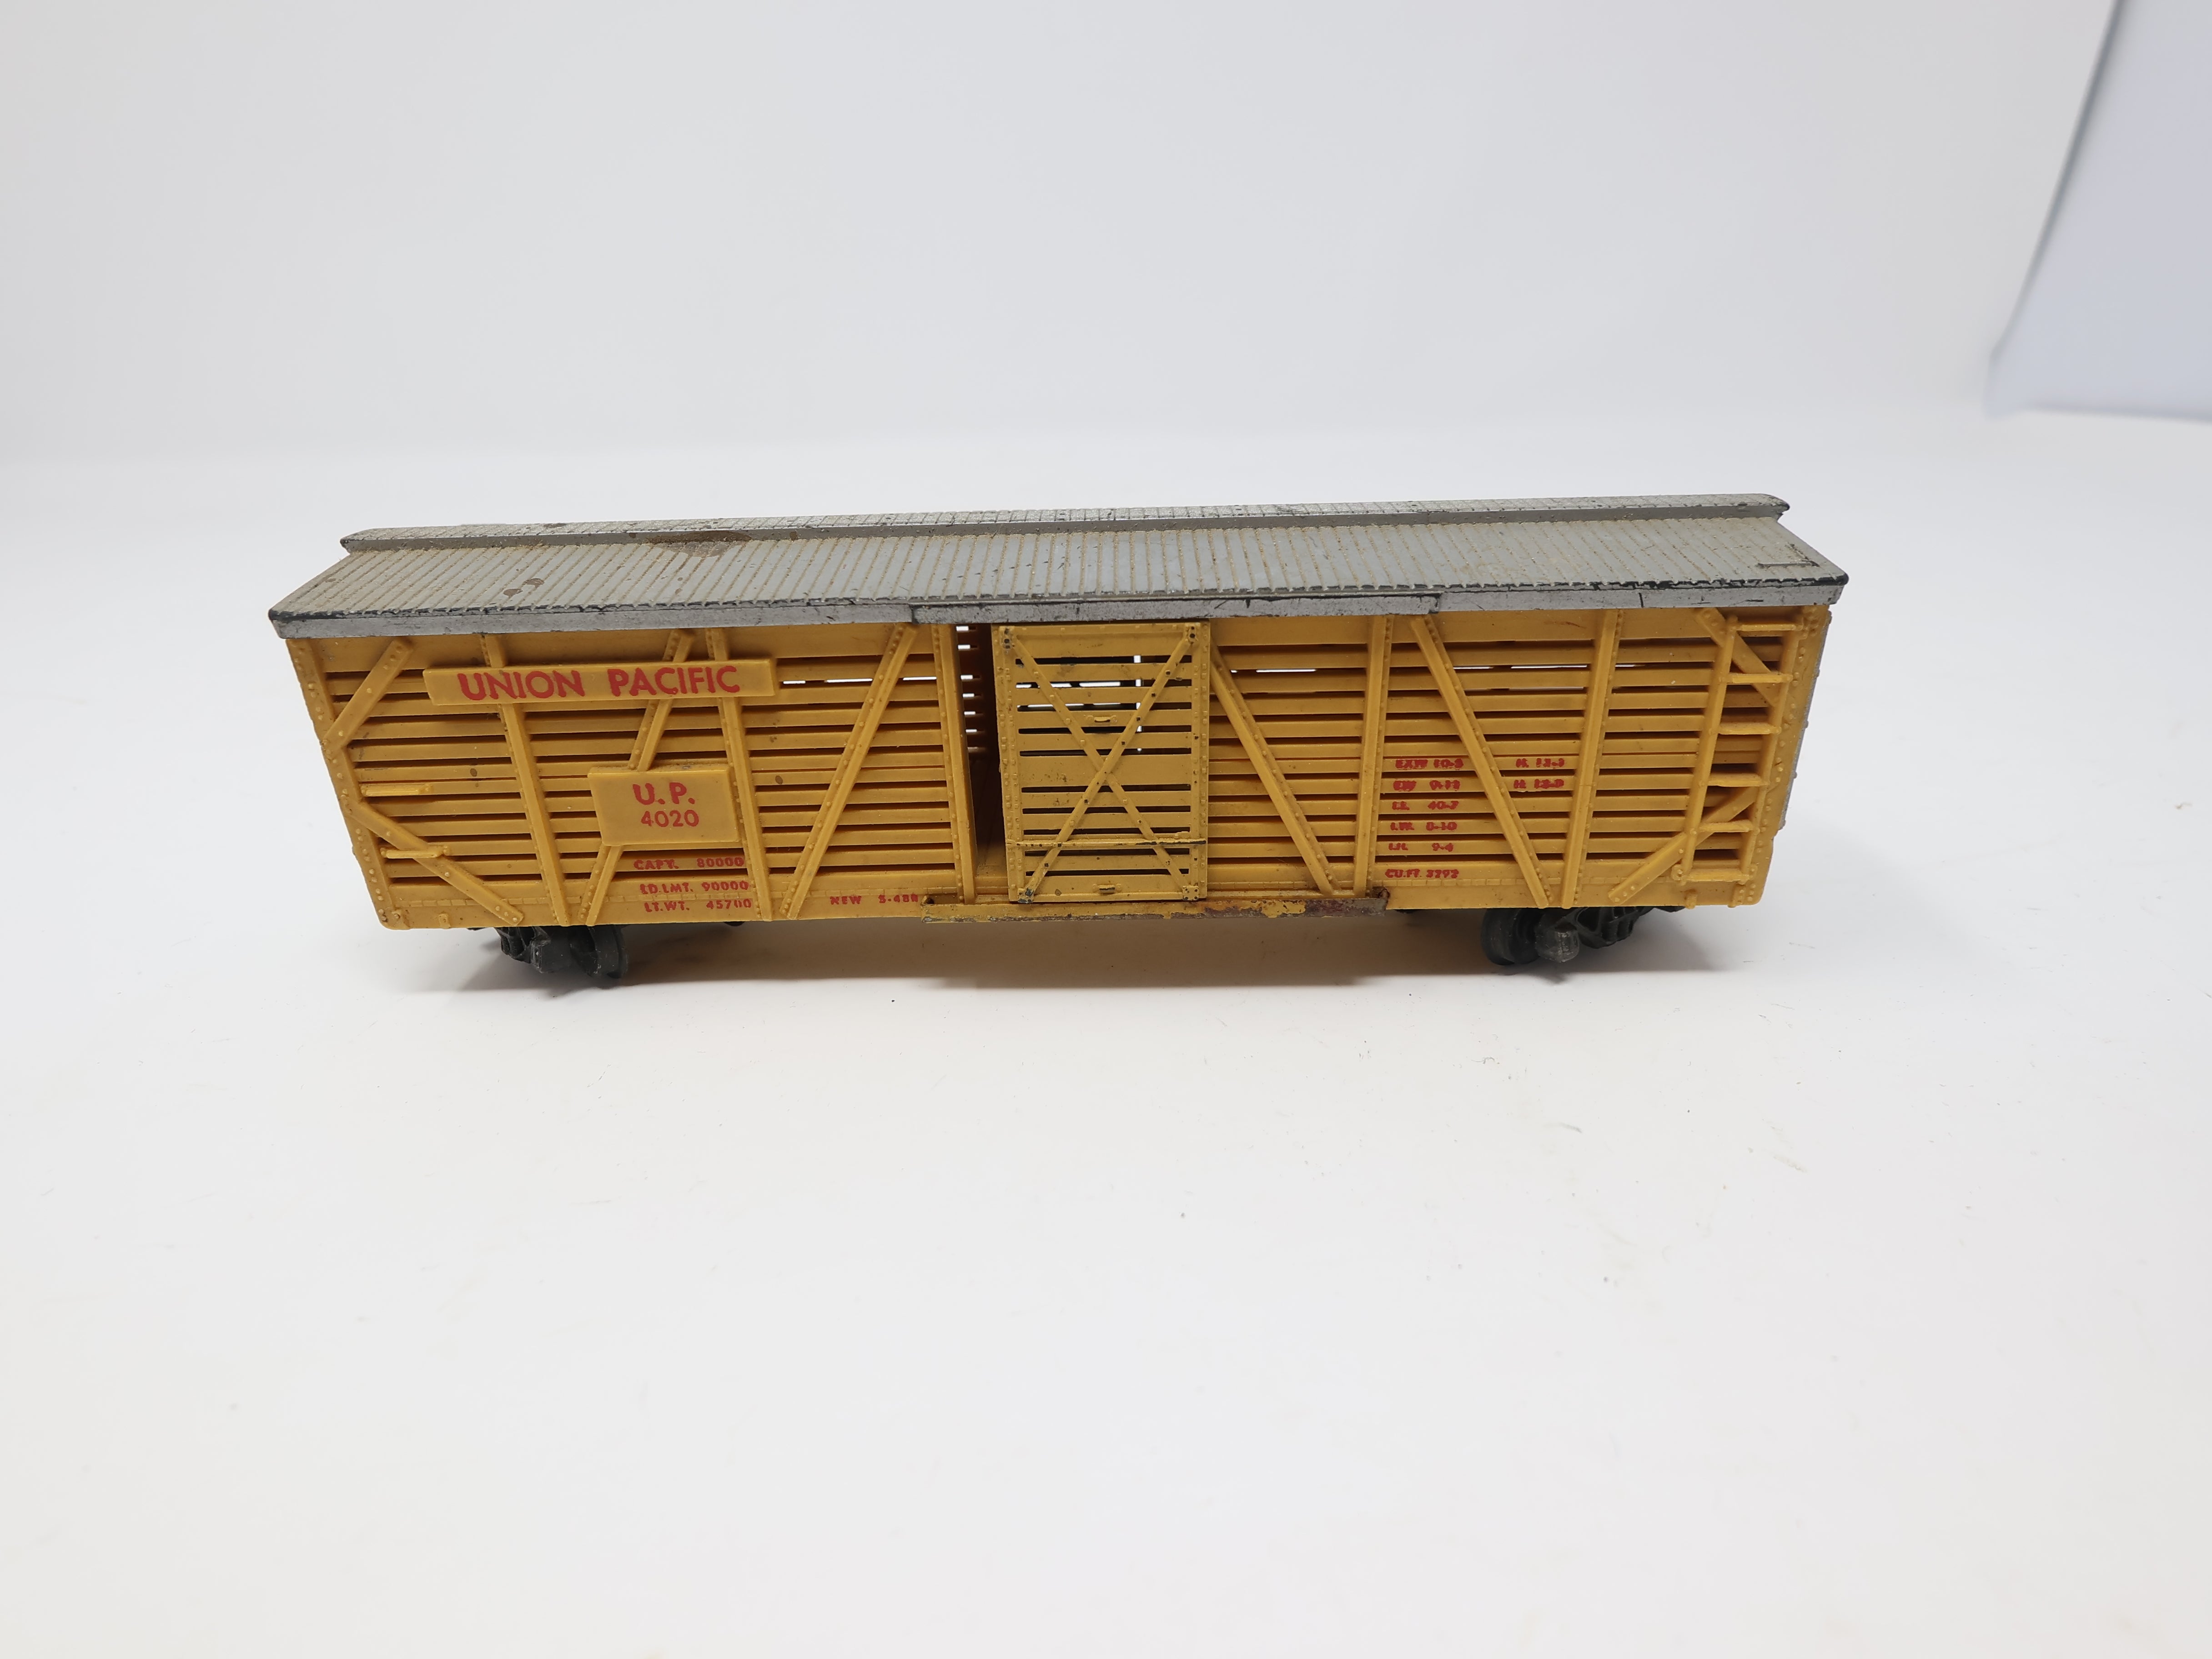 USED REVELL HO Scale, Stock Car, Union Pacific UP #4020